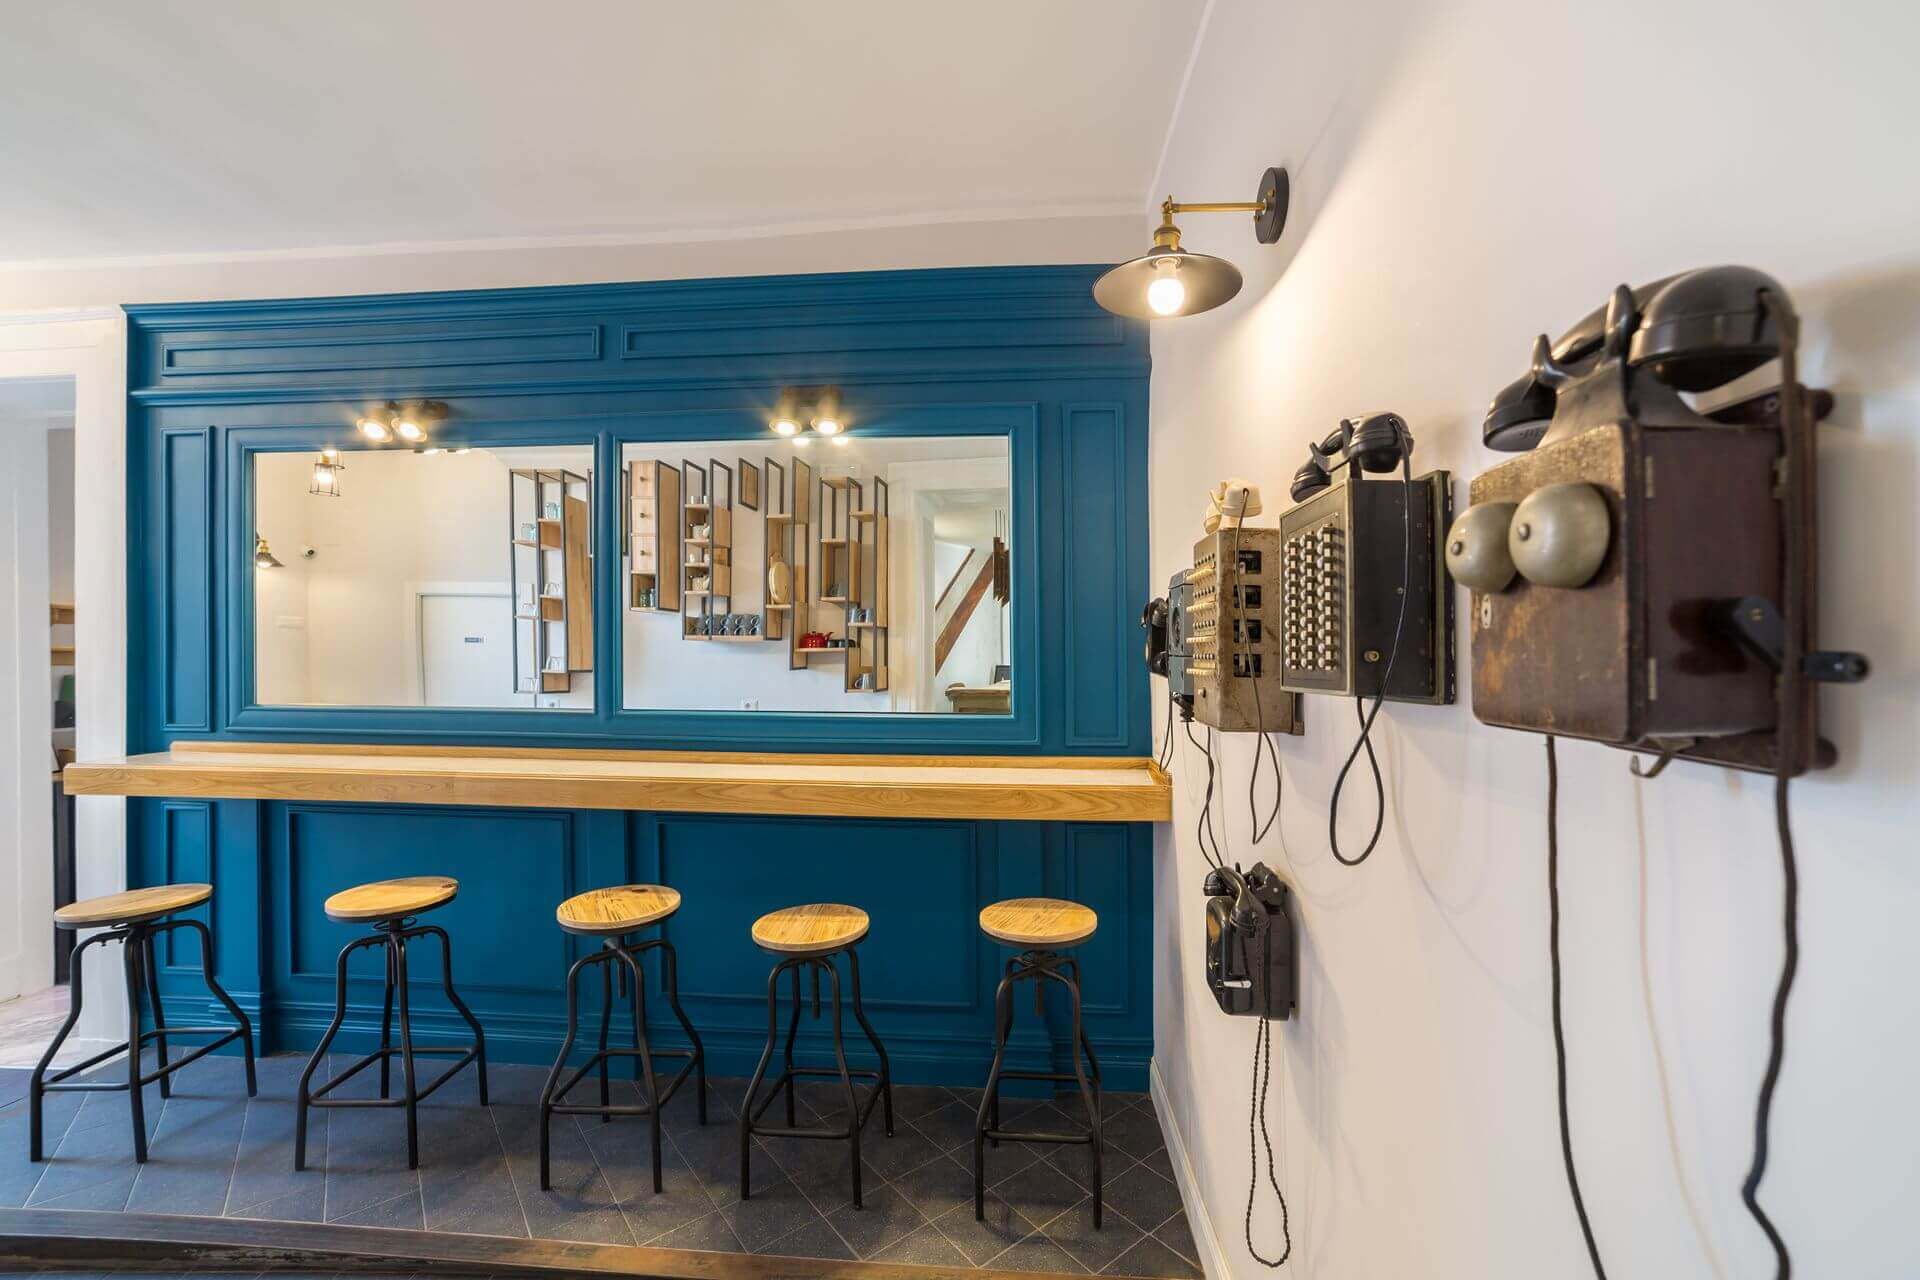 Quirky touches such as old telephones decorate the communal space